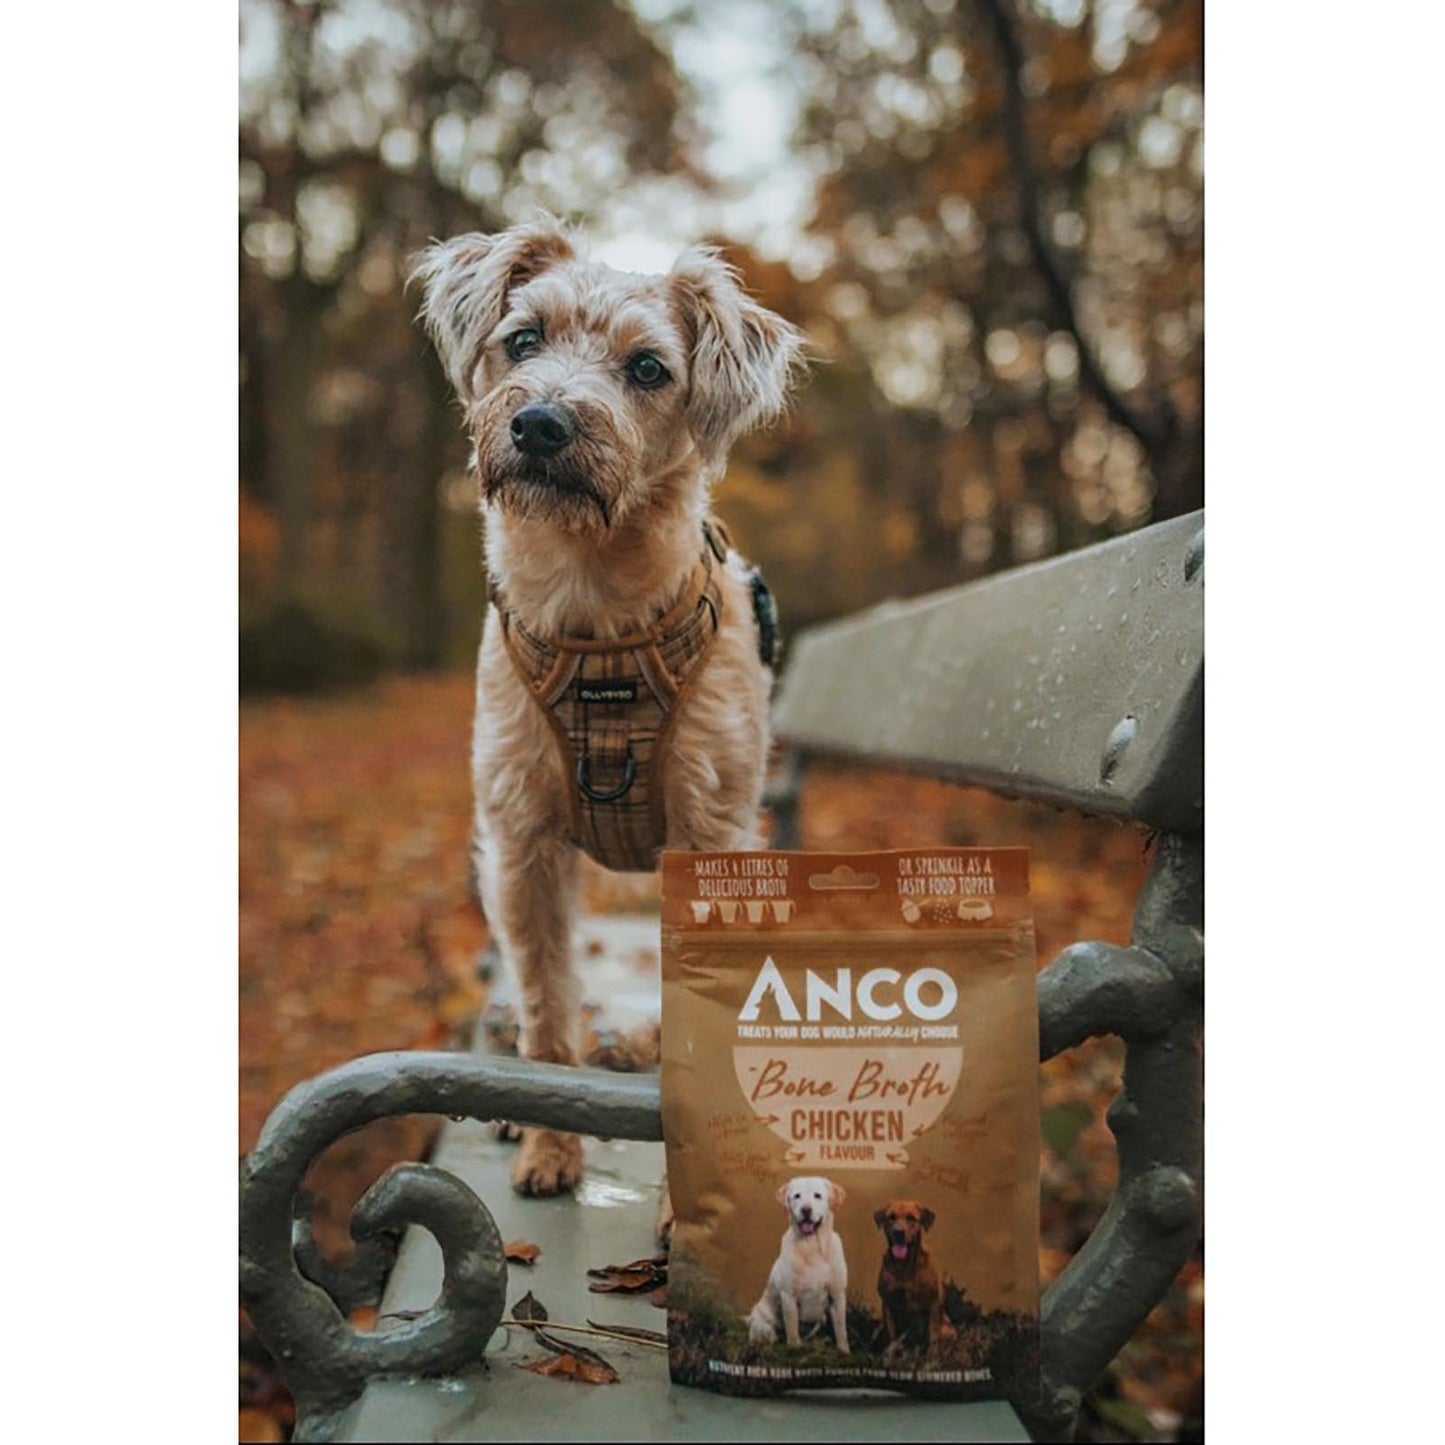 Chicken Bone Broth for Dogs 120g | Supplement for Dogs - Anco